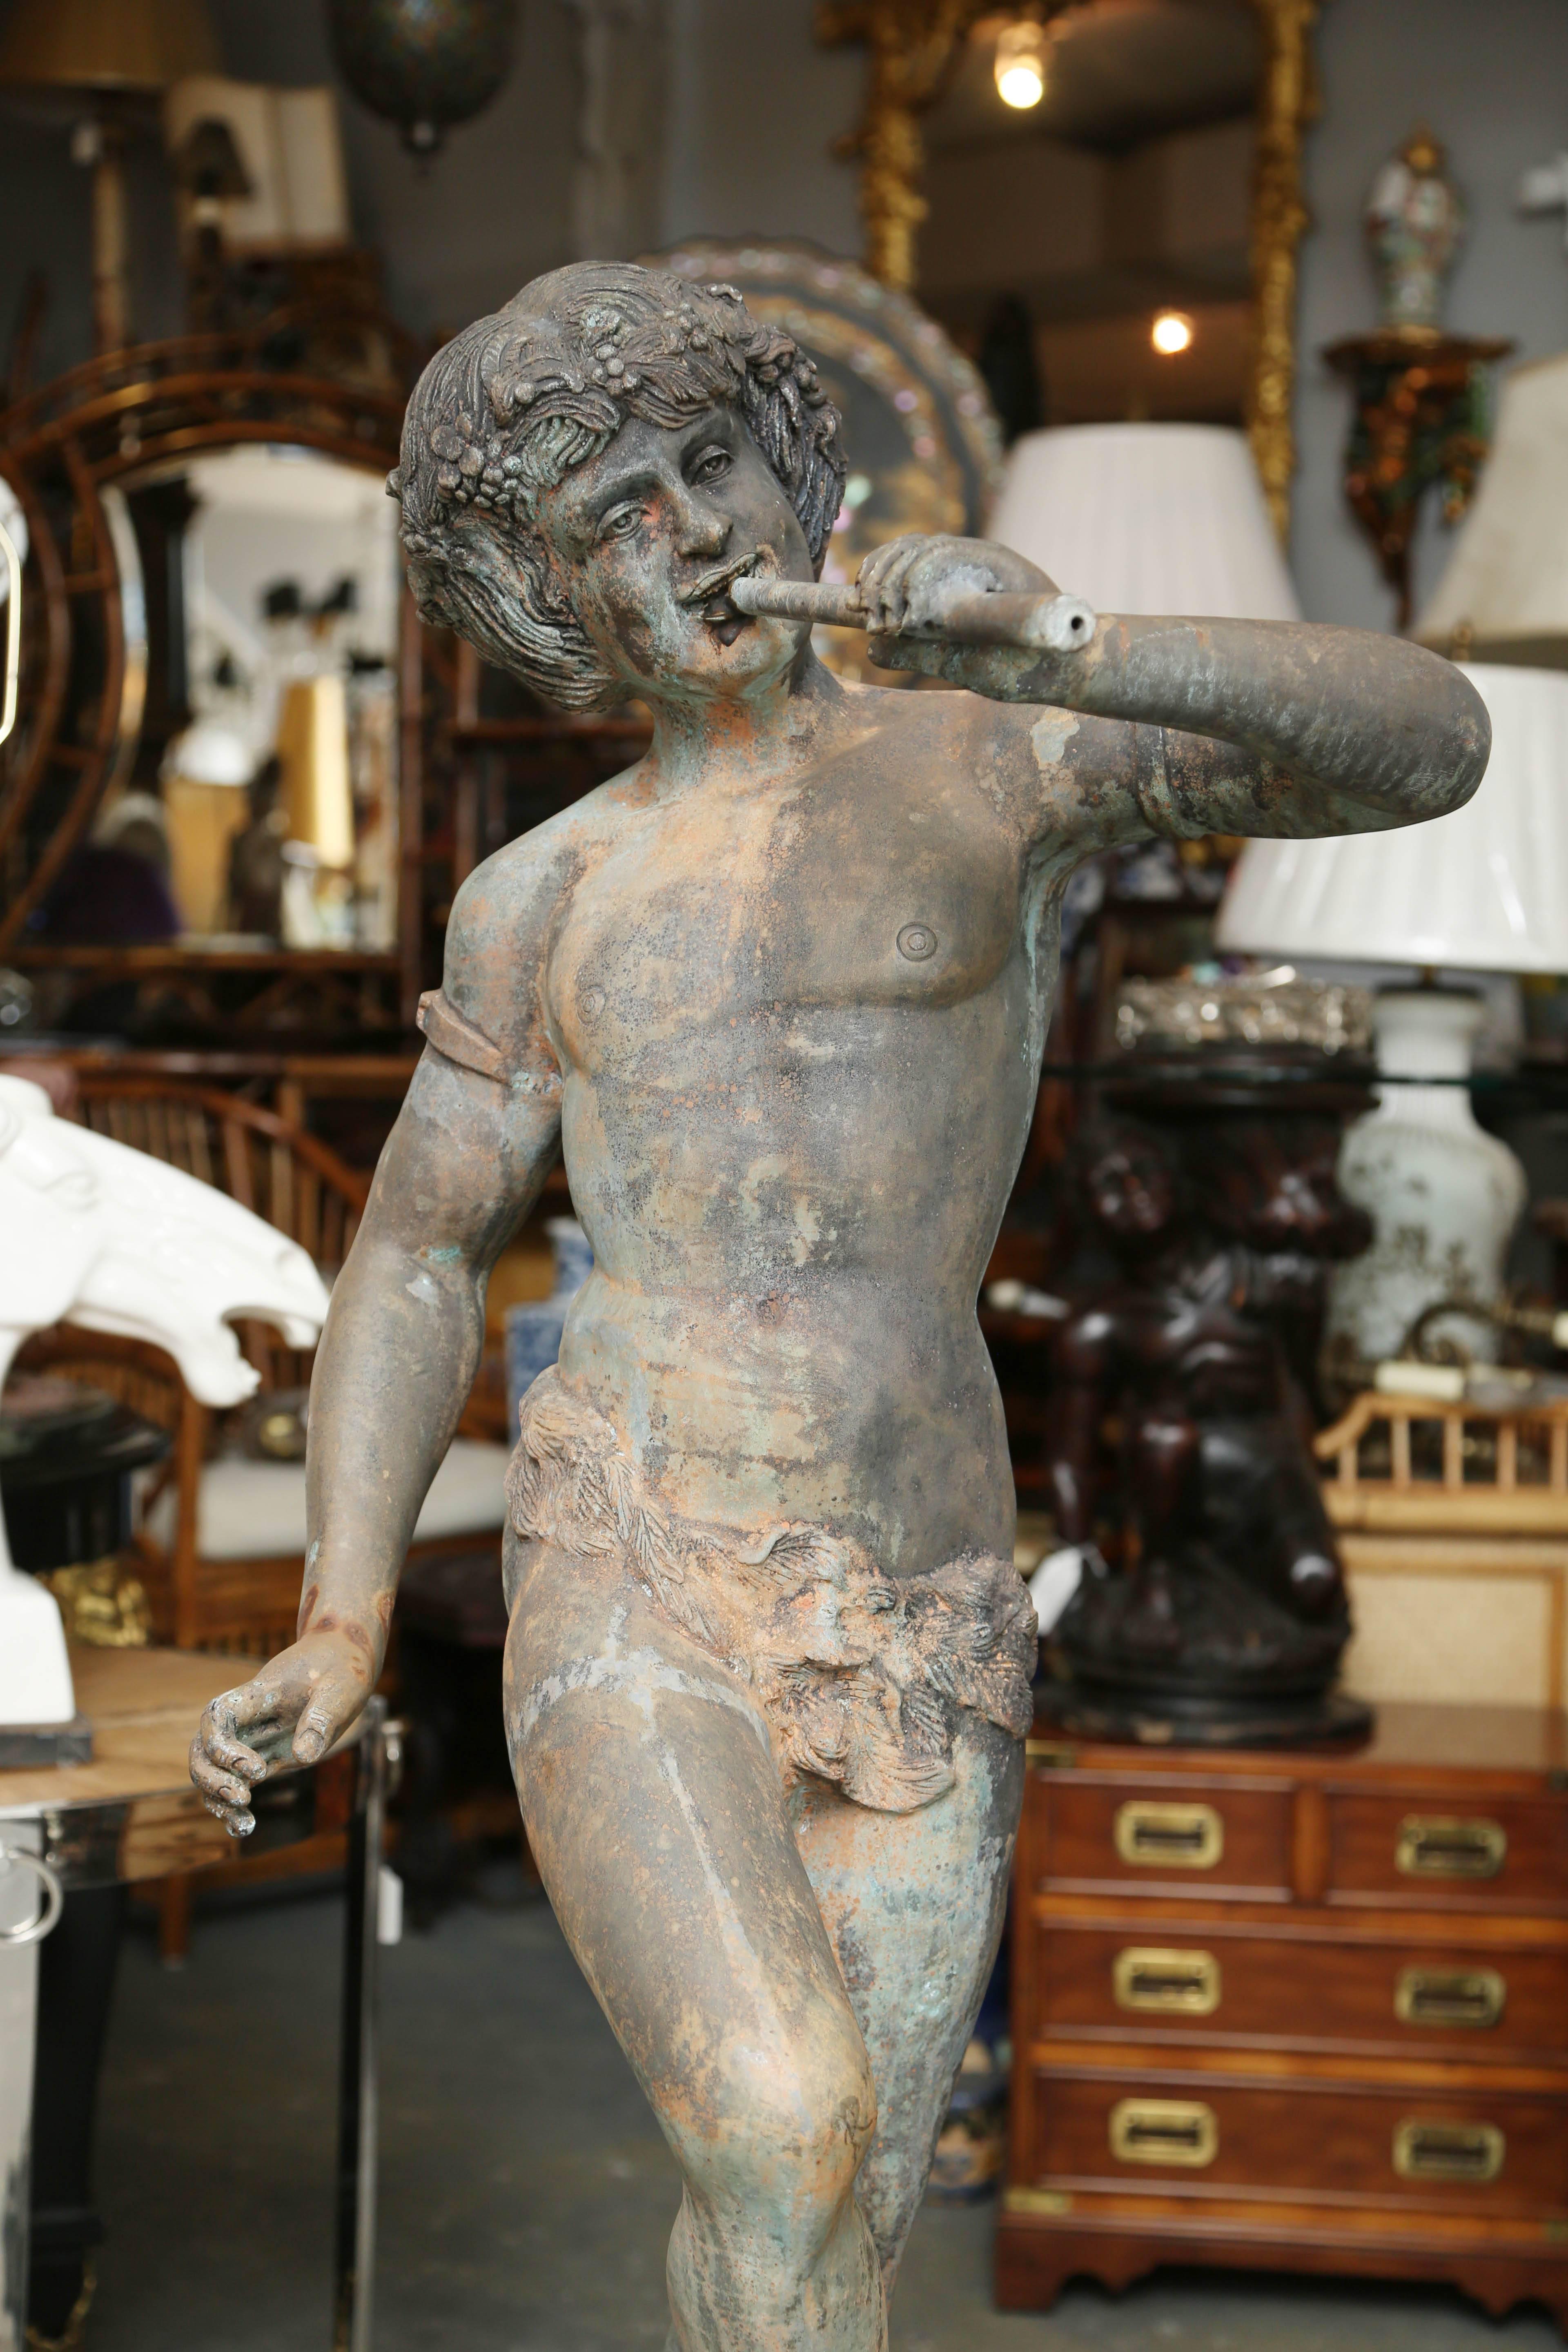 A fine figure of a youth playing a flute and standing on a large shell.
The face is expressive, and both his hands and feet are well formed.
A well posed Greco-Roman figure.

 